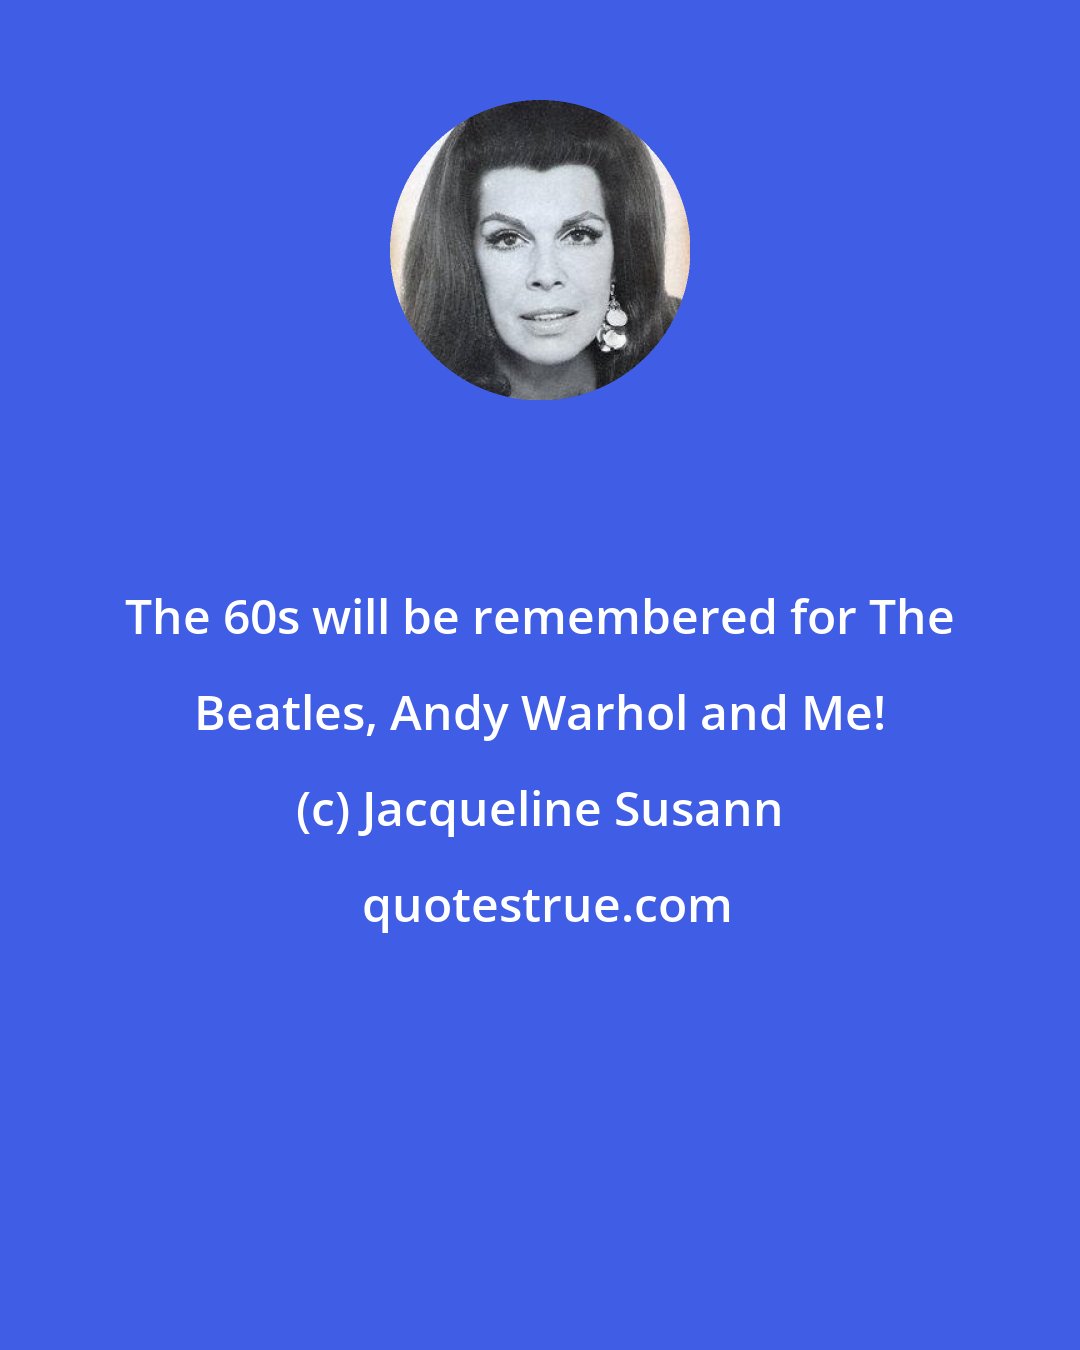 Jacqueline Susann: The 60s will be remembered for The Beatles, Andy Warhol and Me!